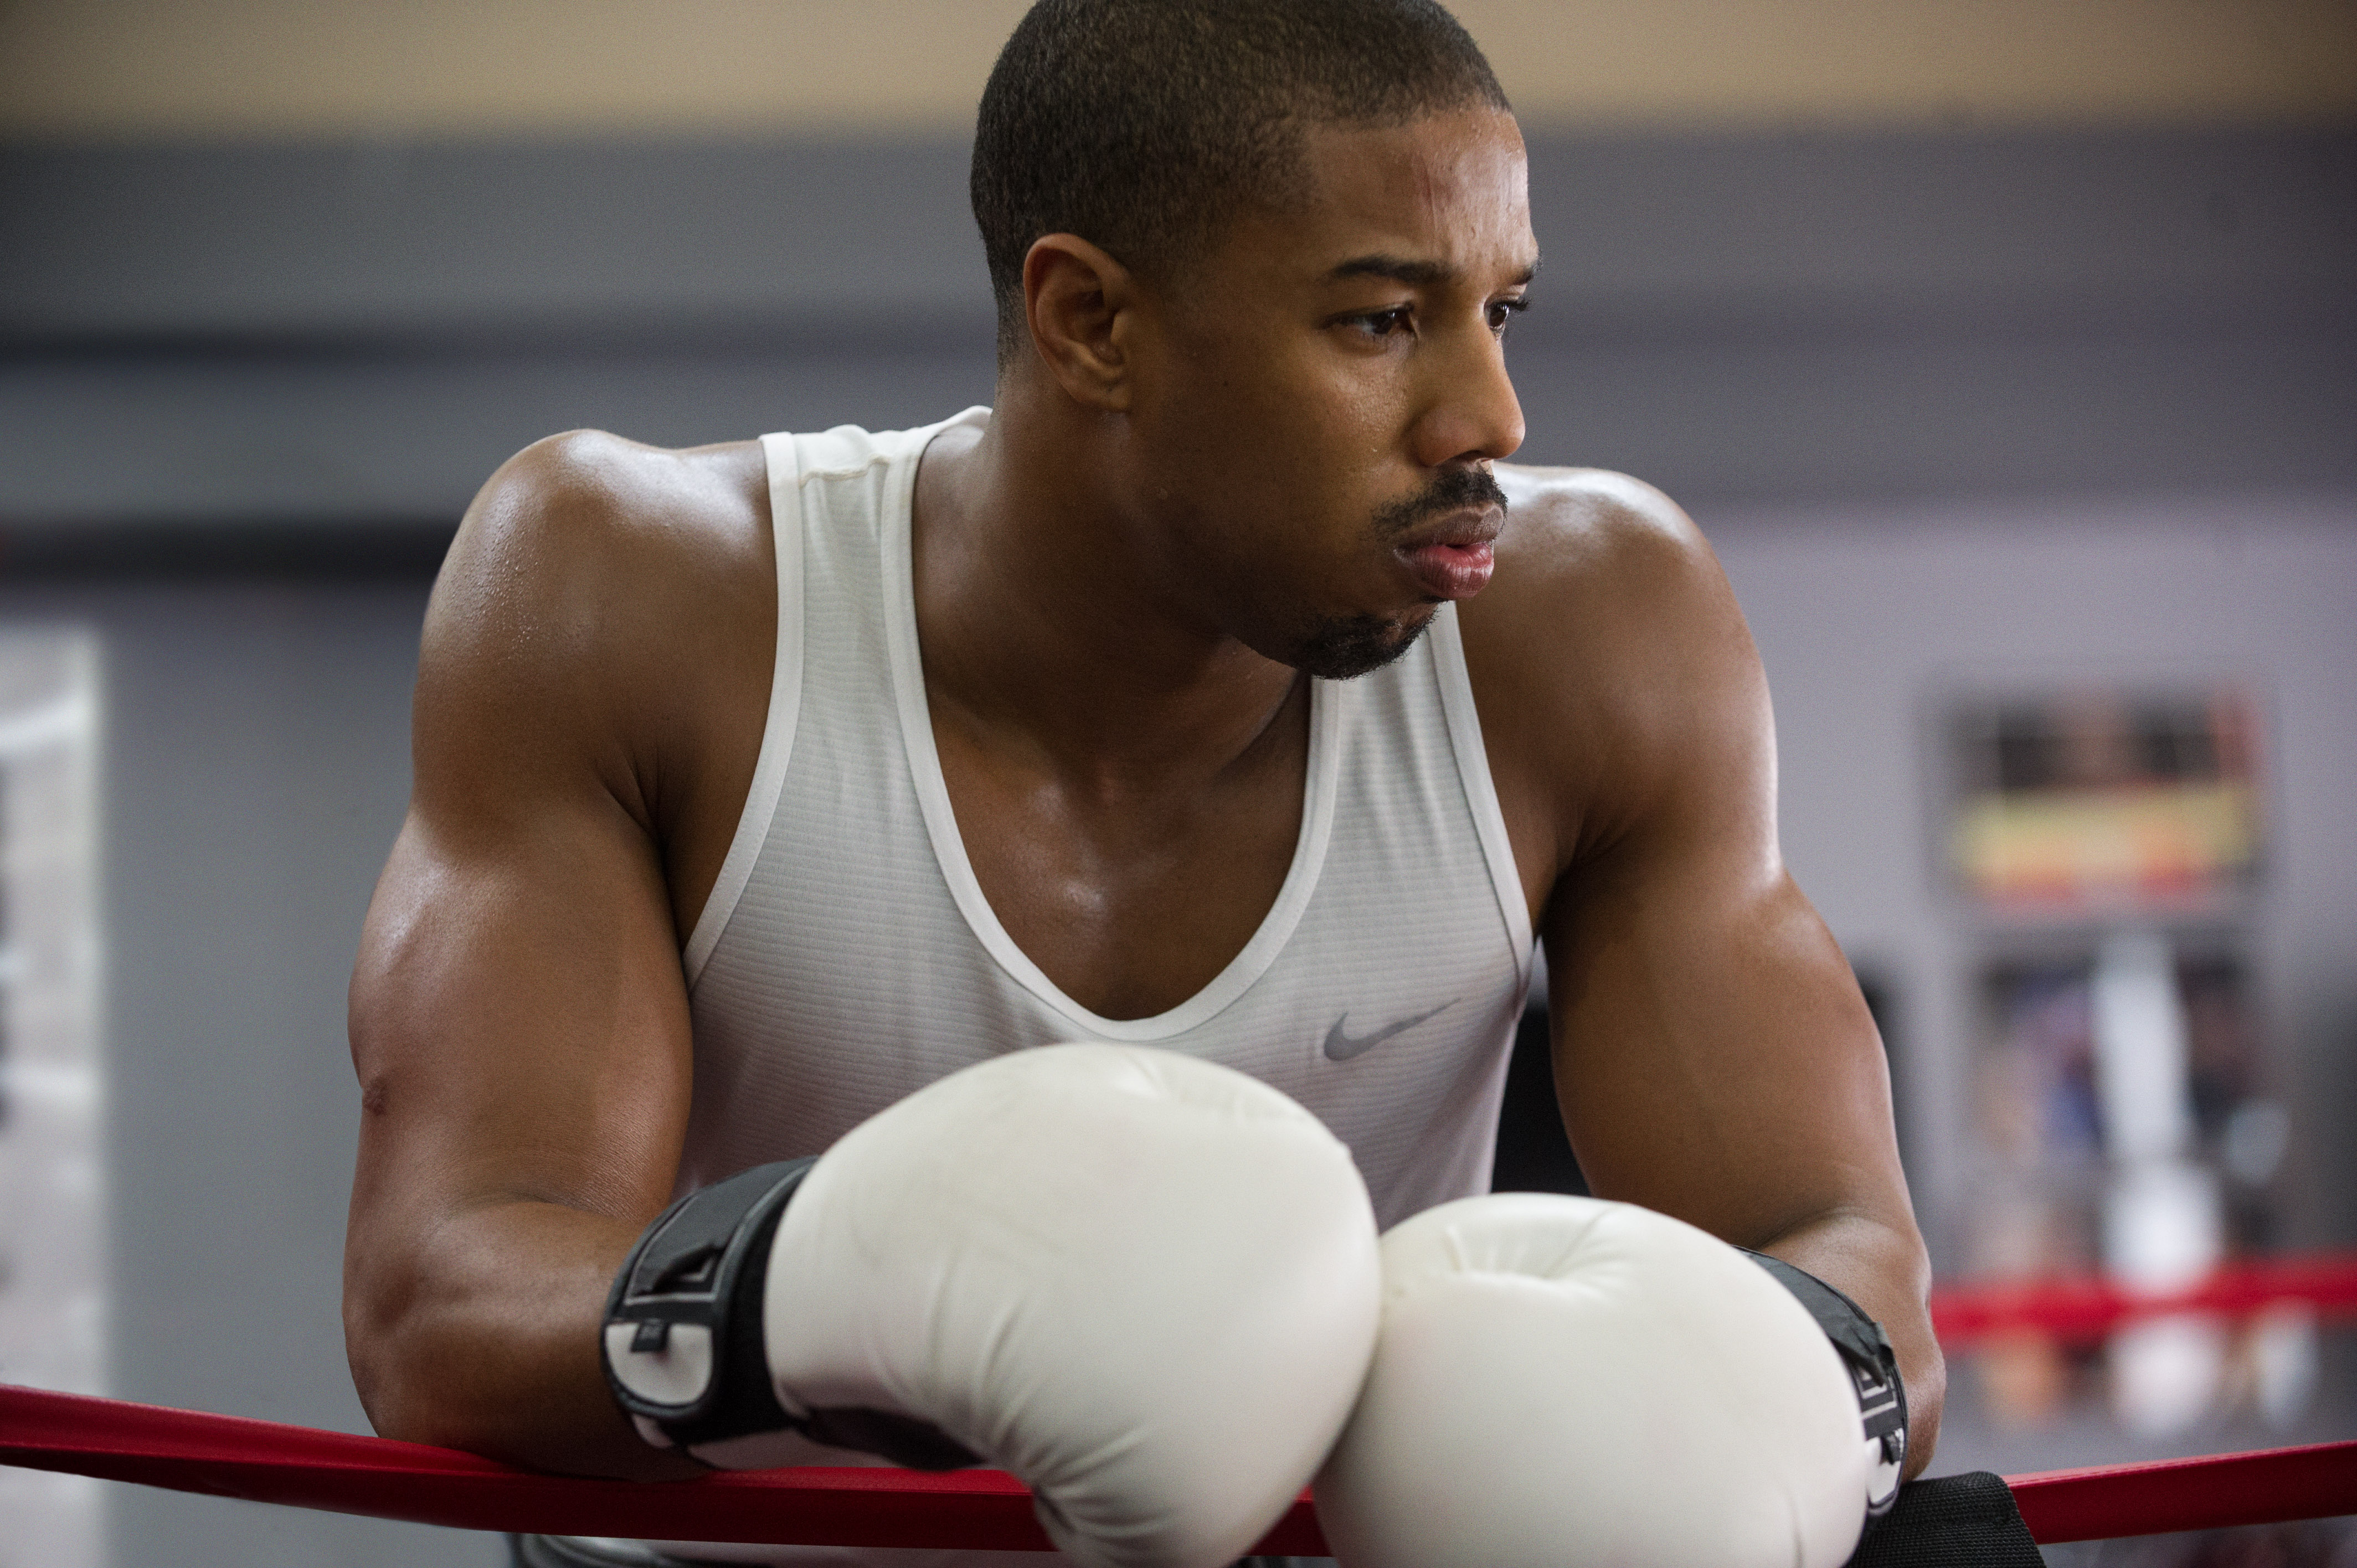 Movie Creed HD Wallpaper | Background Image